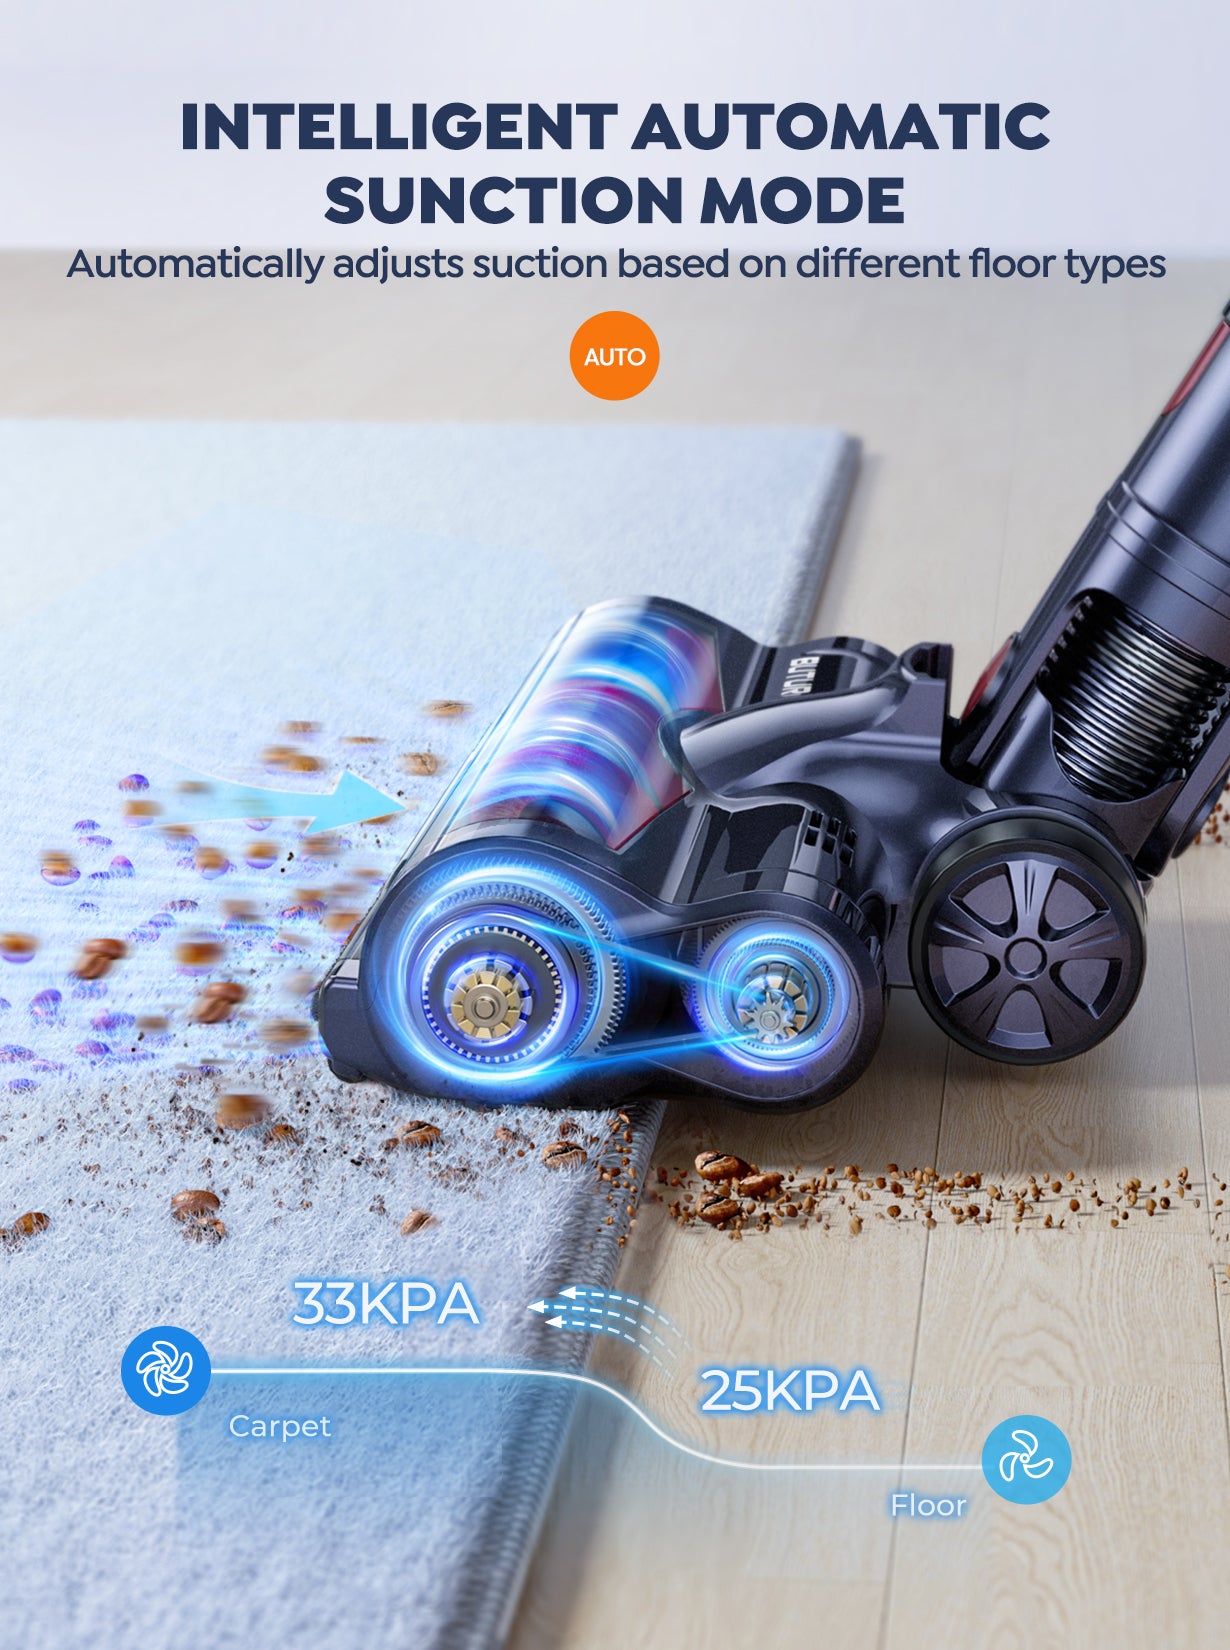 BuTure VC70 Cordless Vacuum Cleaner: 450W, 33Kpa, Upgraded Filtration